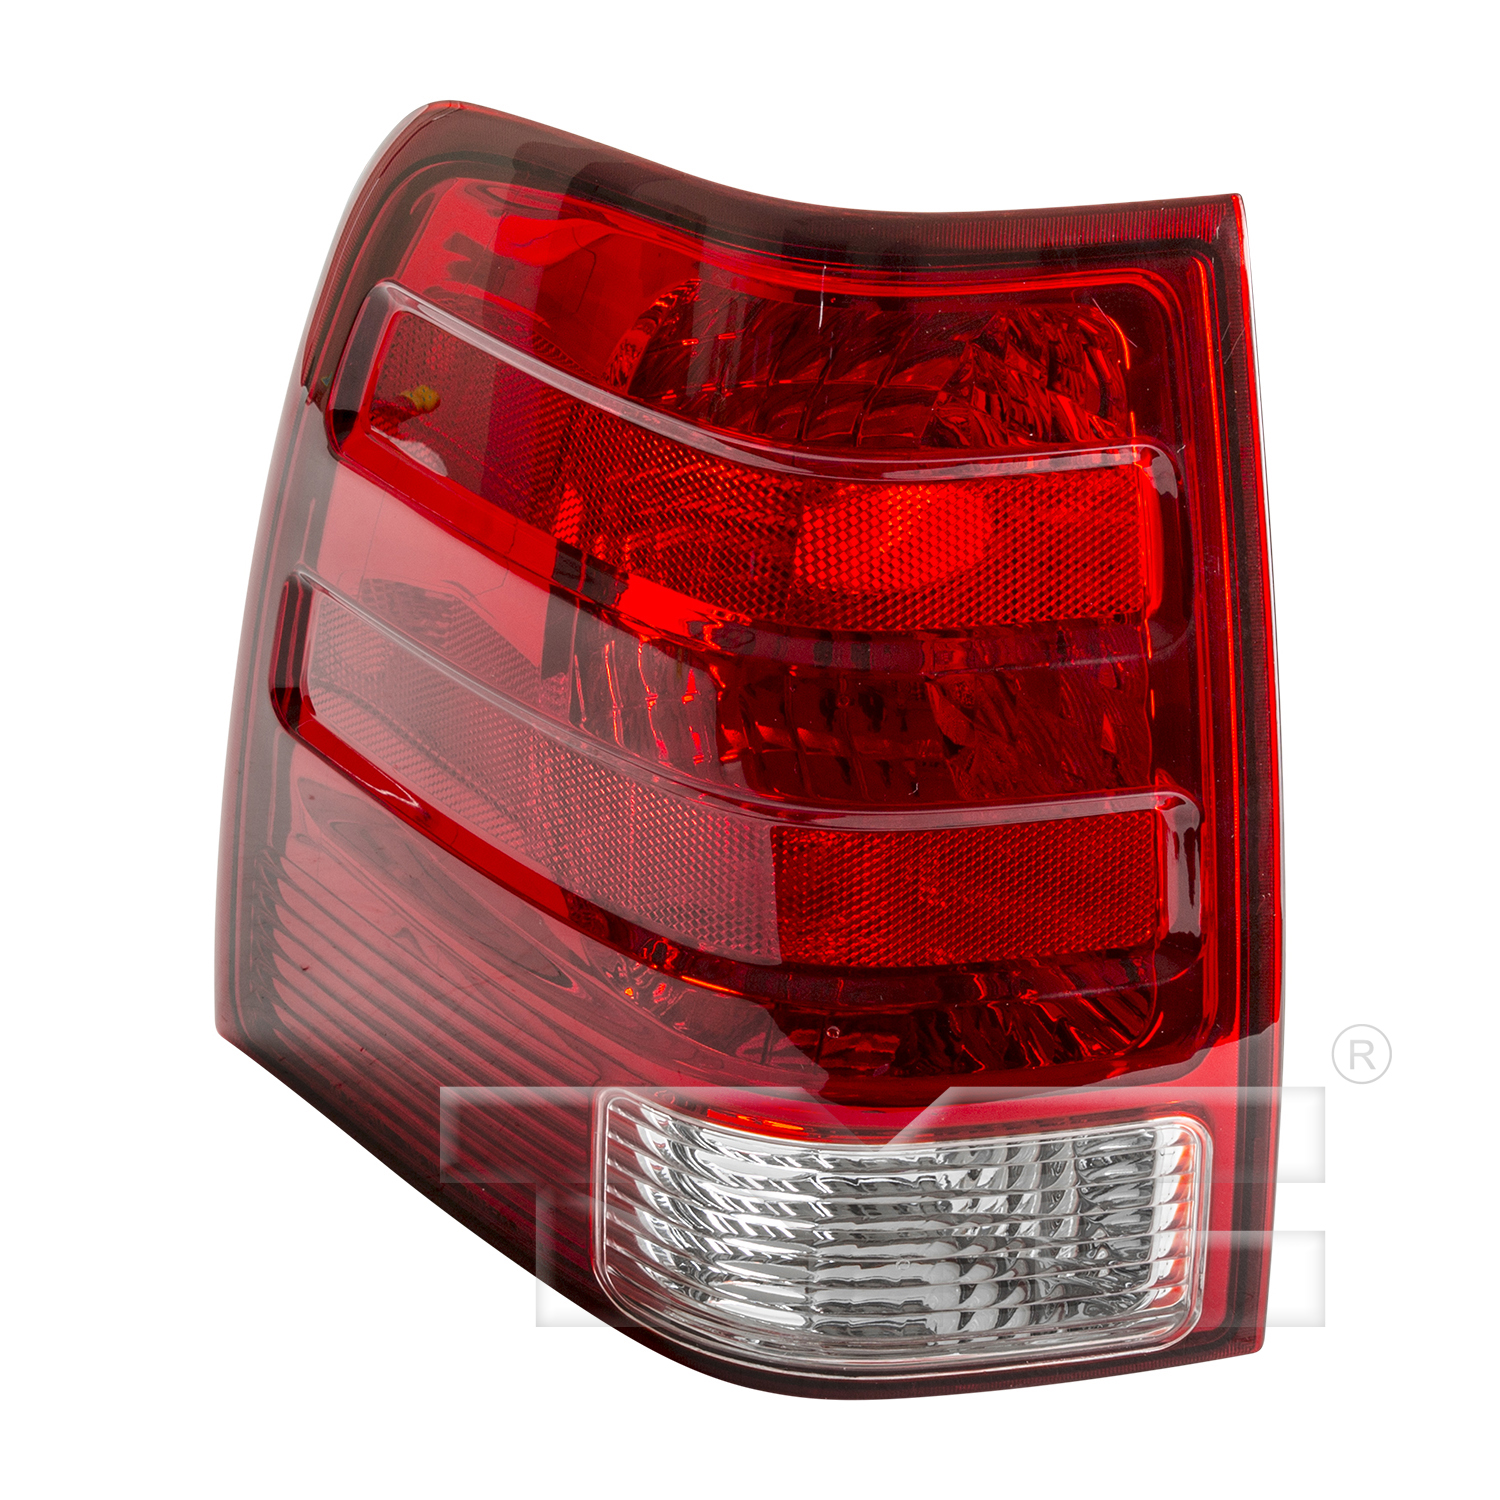 Aftermarket TAILLIGHTS for FORD - EXPEDITION, EXPEDITION,03-06,LT Taillamp assy